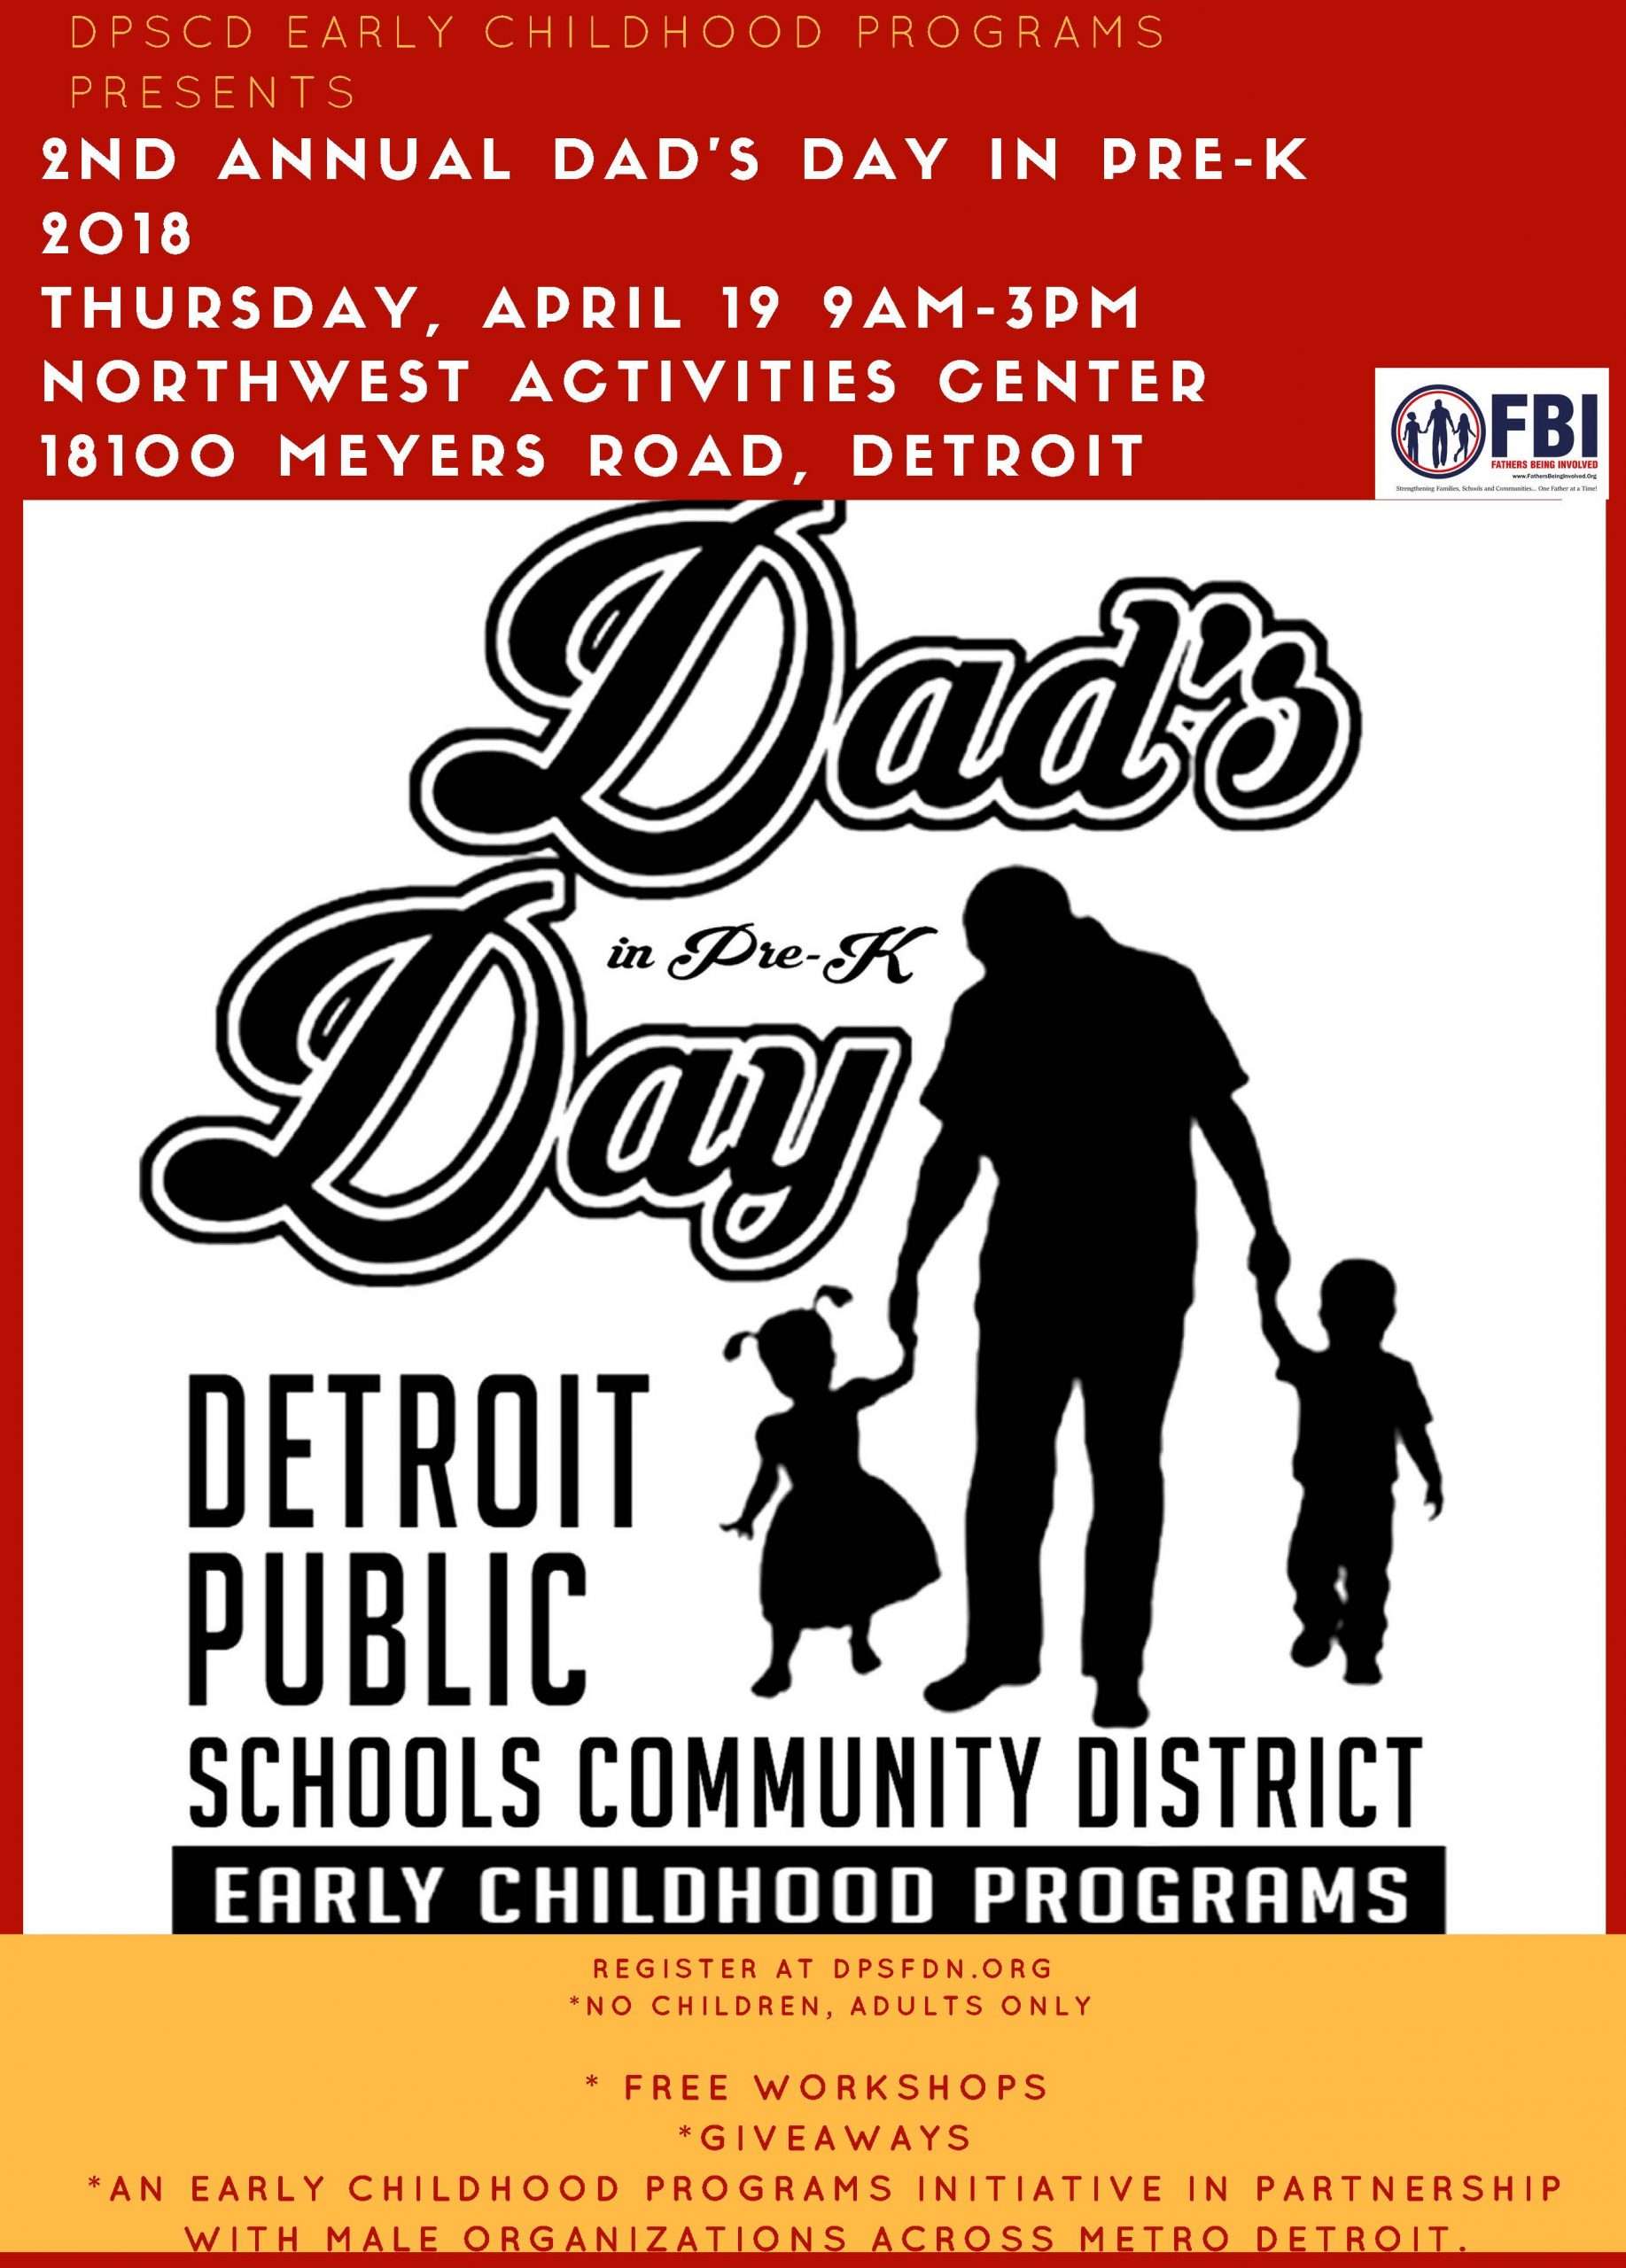 2nd Annual Dad’s Day in Pre-K